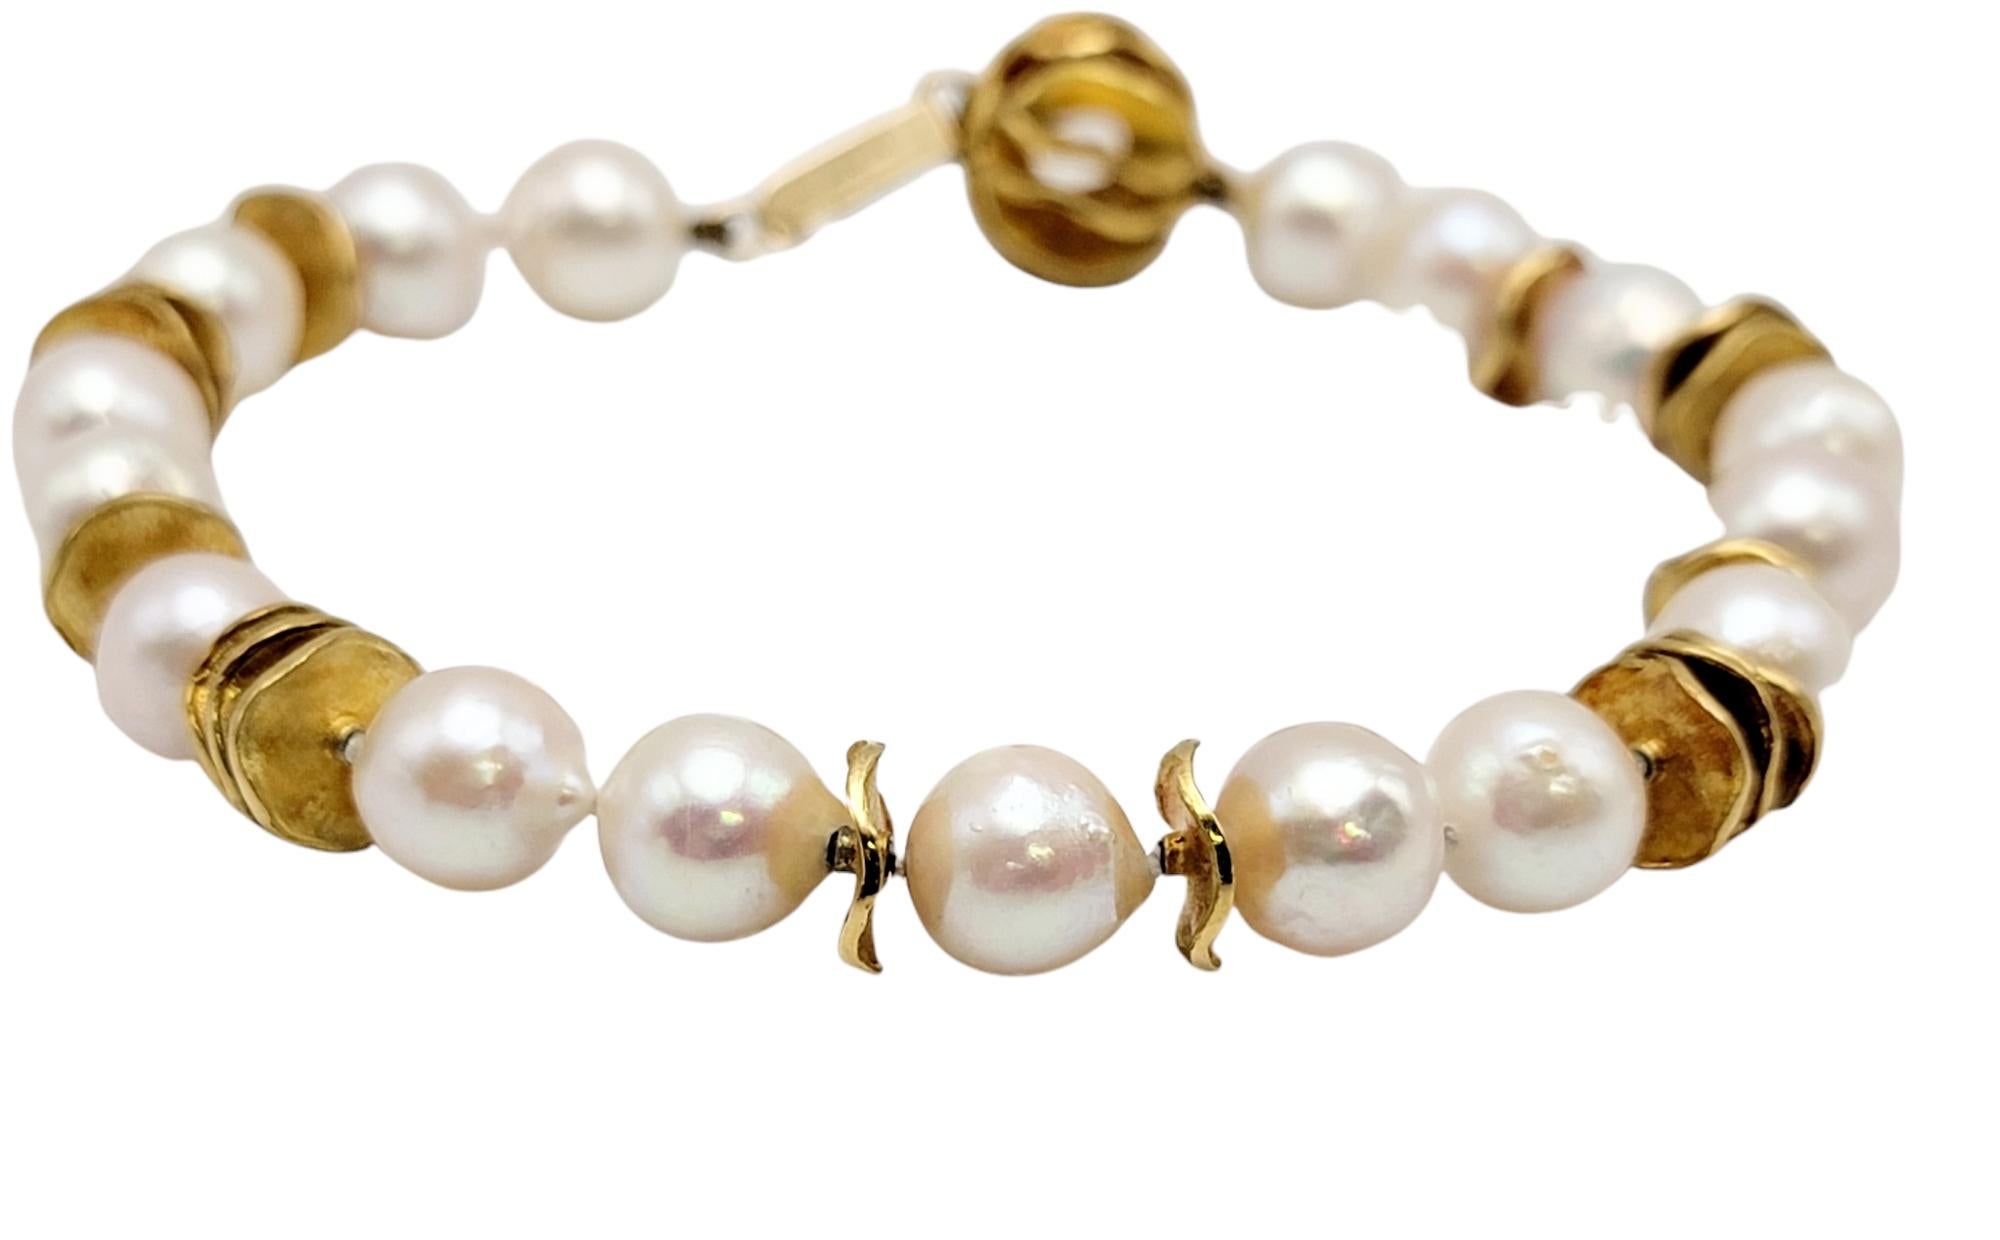 Beautiful timeless Cultured Akoya pearl and 14K gold bracelet. The lustrous, creamy pearls absolutely glow among the bright gold wavy discs, boasting an elegance that will stand the test of time. This gorgeous hand crafted piece will be one you will